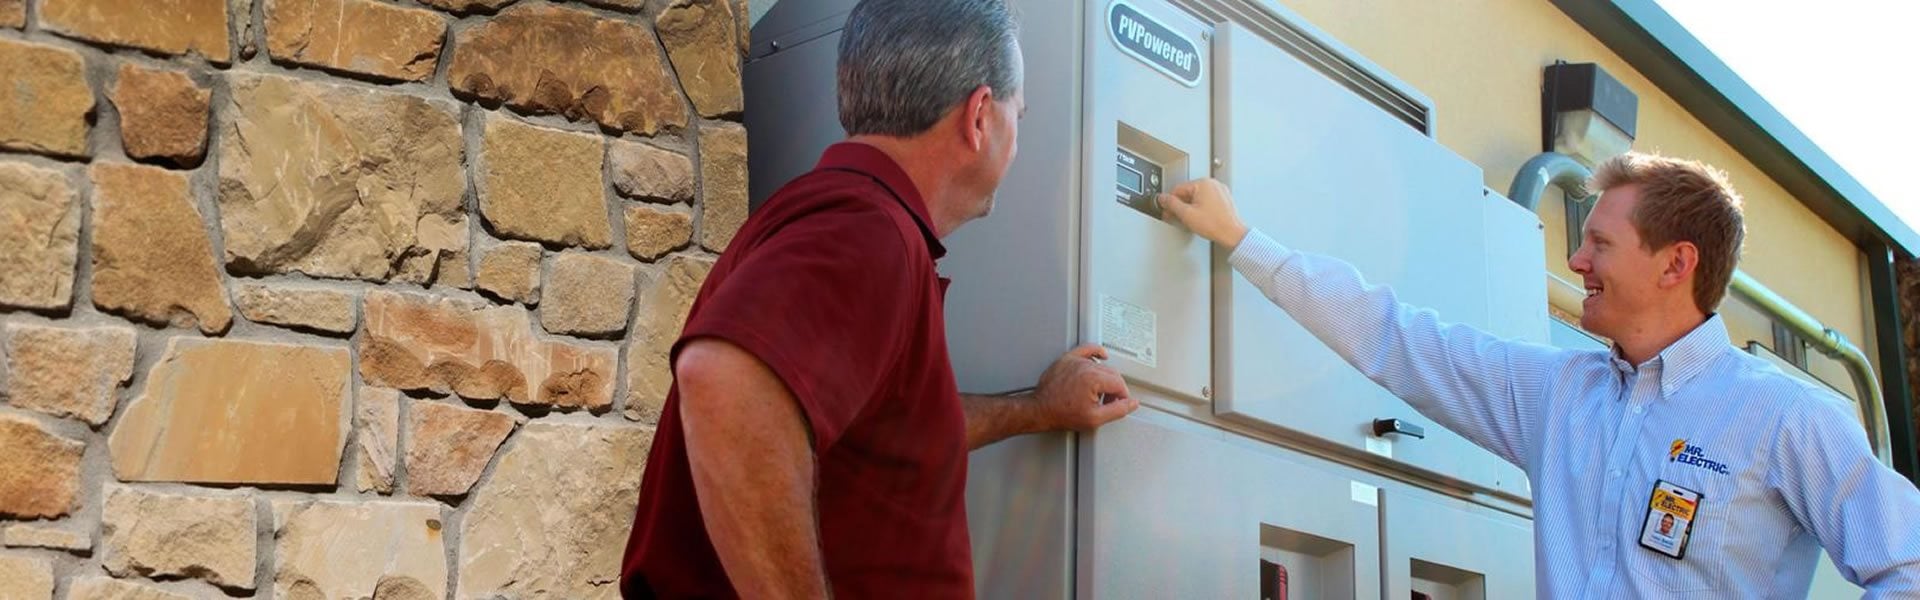 Electrical Panel Replacement in Colleyville